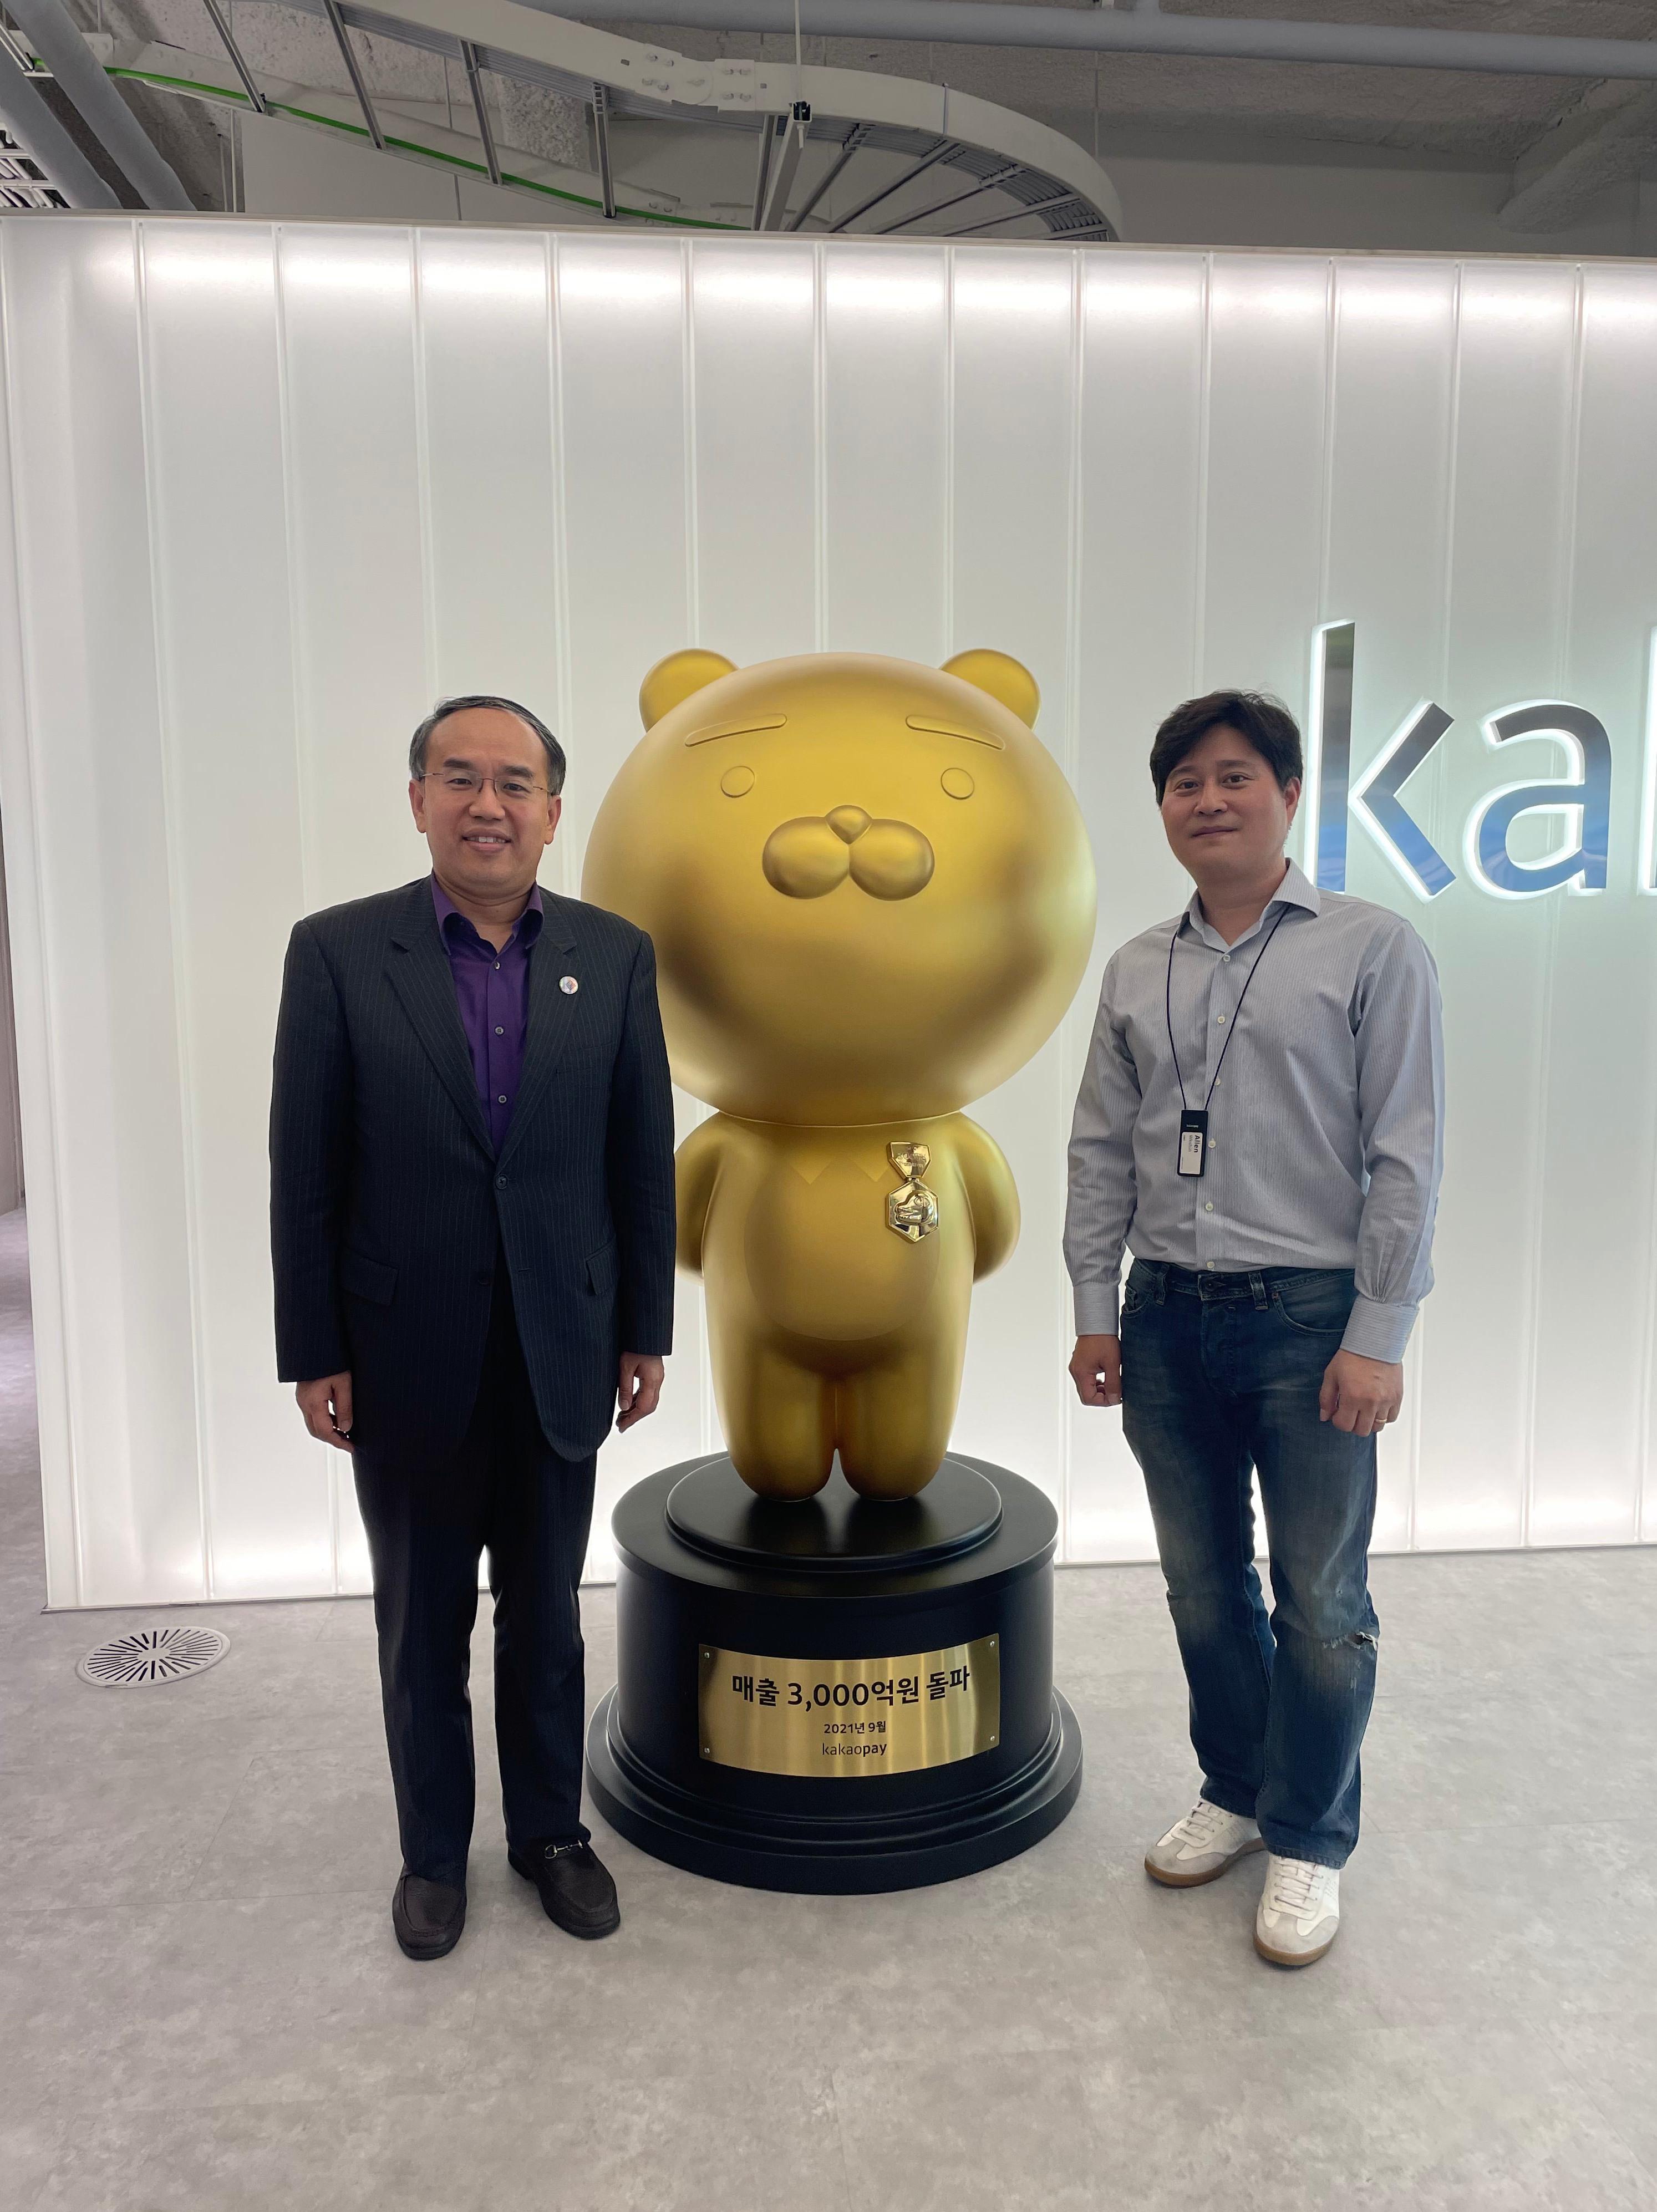 The Secretary for Financial Services and the Treasury, Mr Christopher Hui, continued his visit to Incheon, Korea. Photo shows Mr Hui (left) meeting with the Chief Executive Officer of Kakao Pay, Mr Shin Won-keun (right), yesterday (May 3).